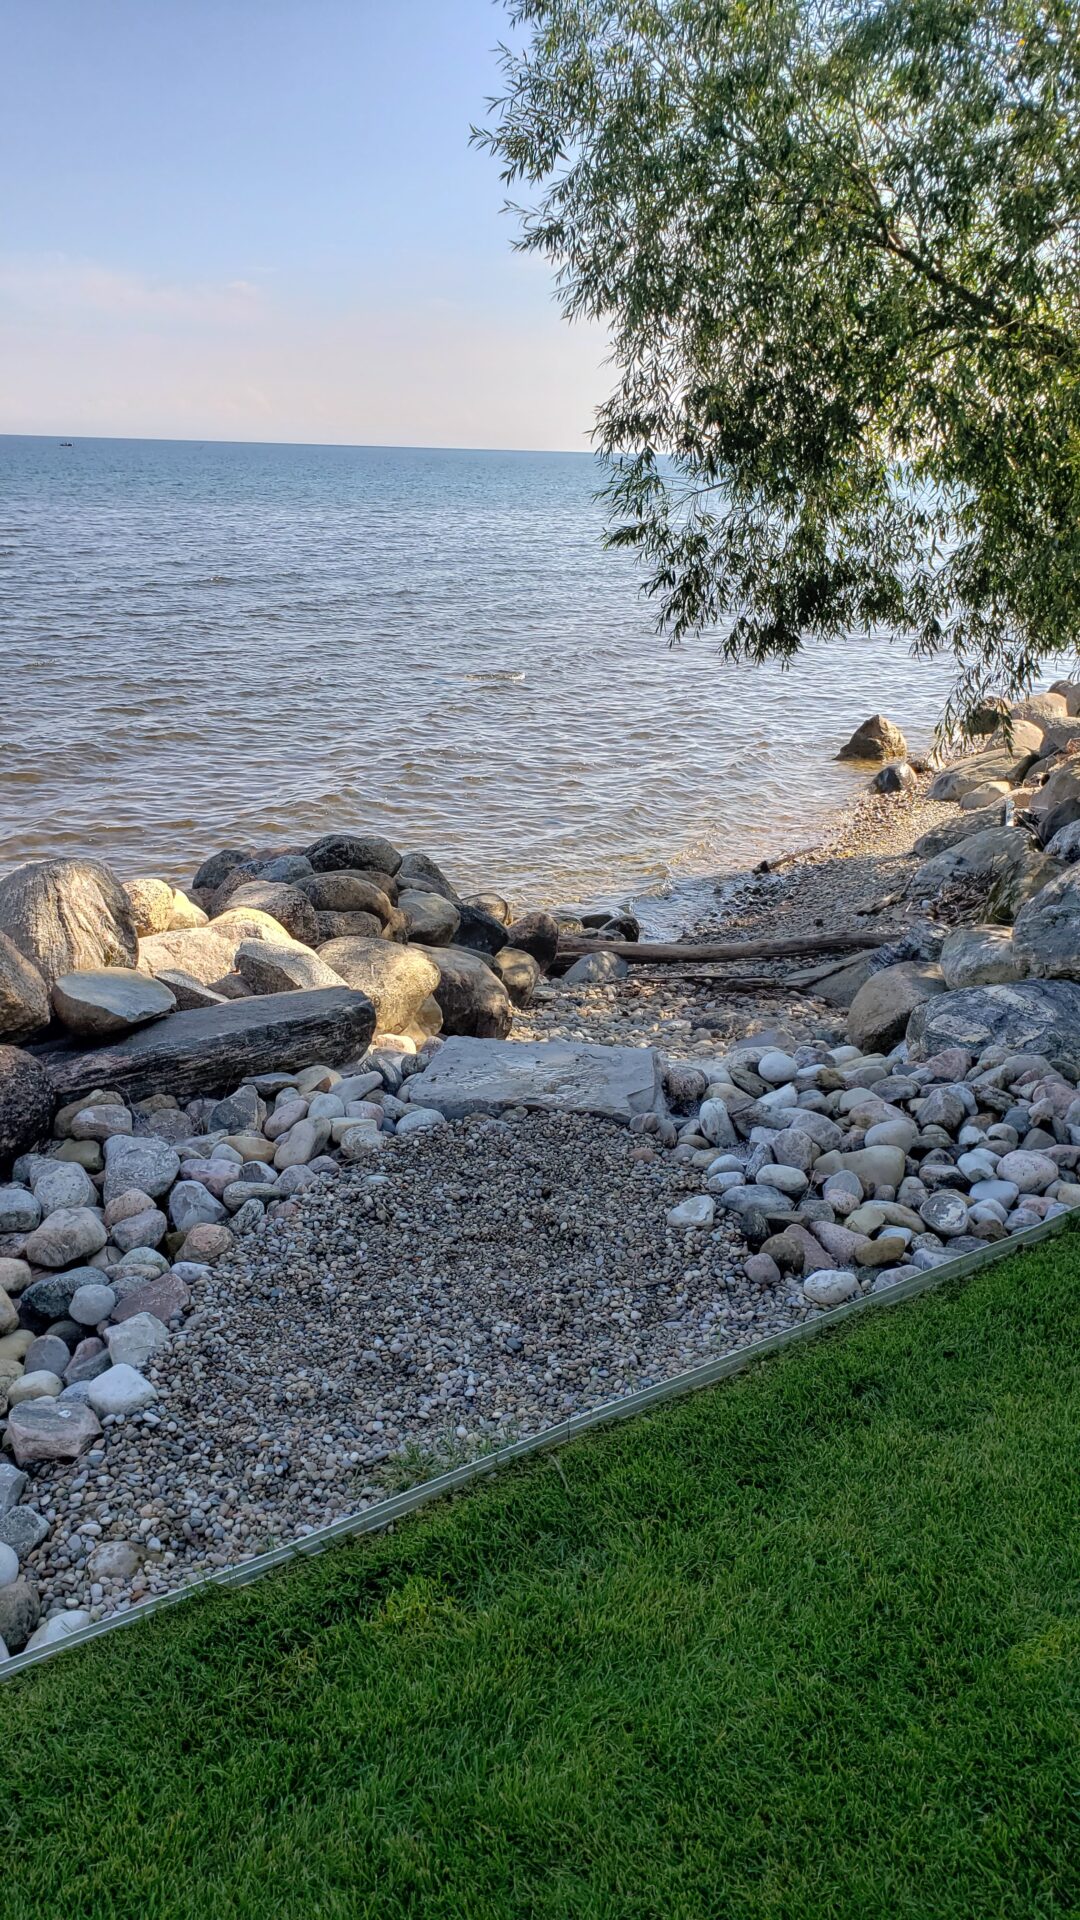 A tree overhangs a rocky shoreline leading into a calm lake under a clear blue sky. Green grass contrasts with the pebbled beach.